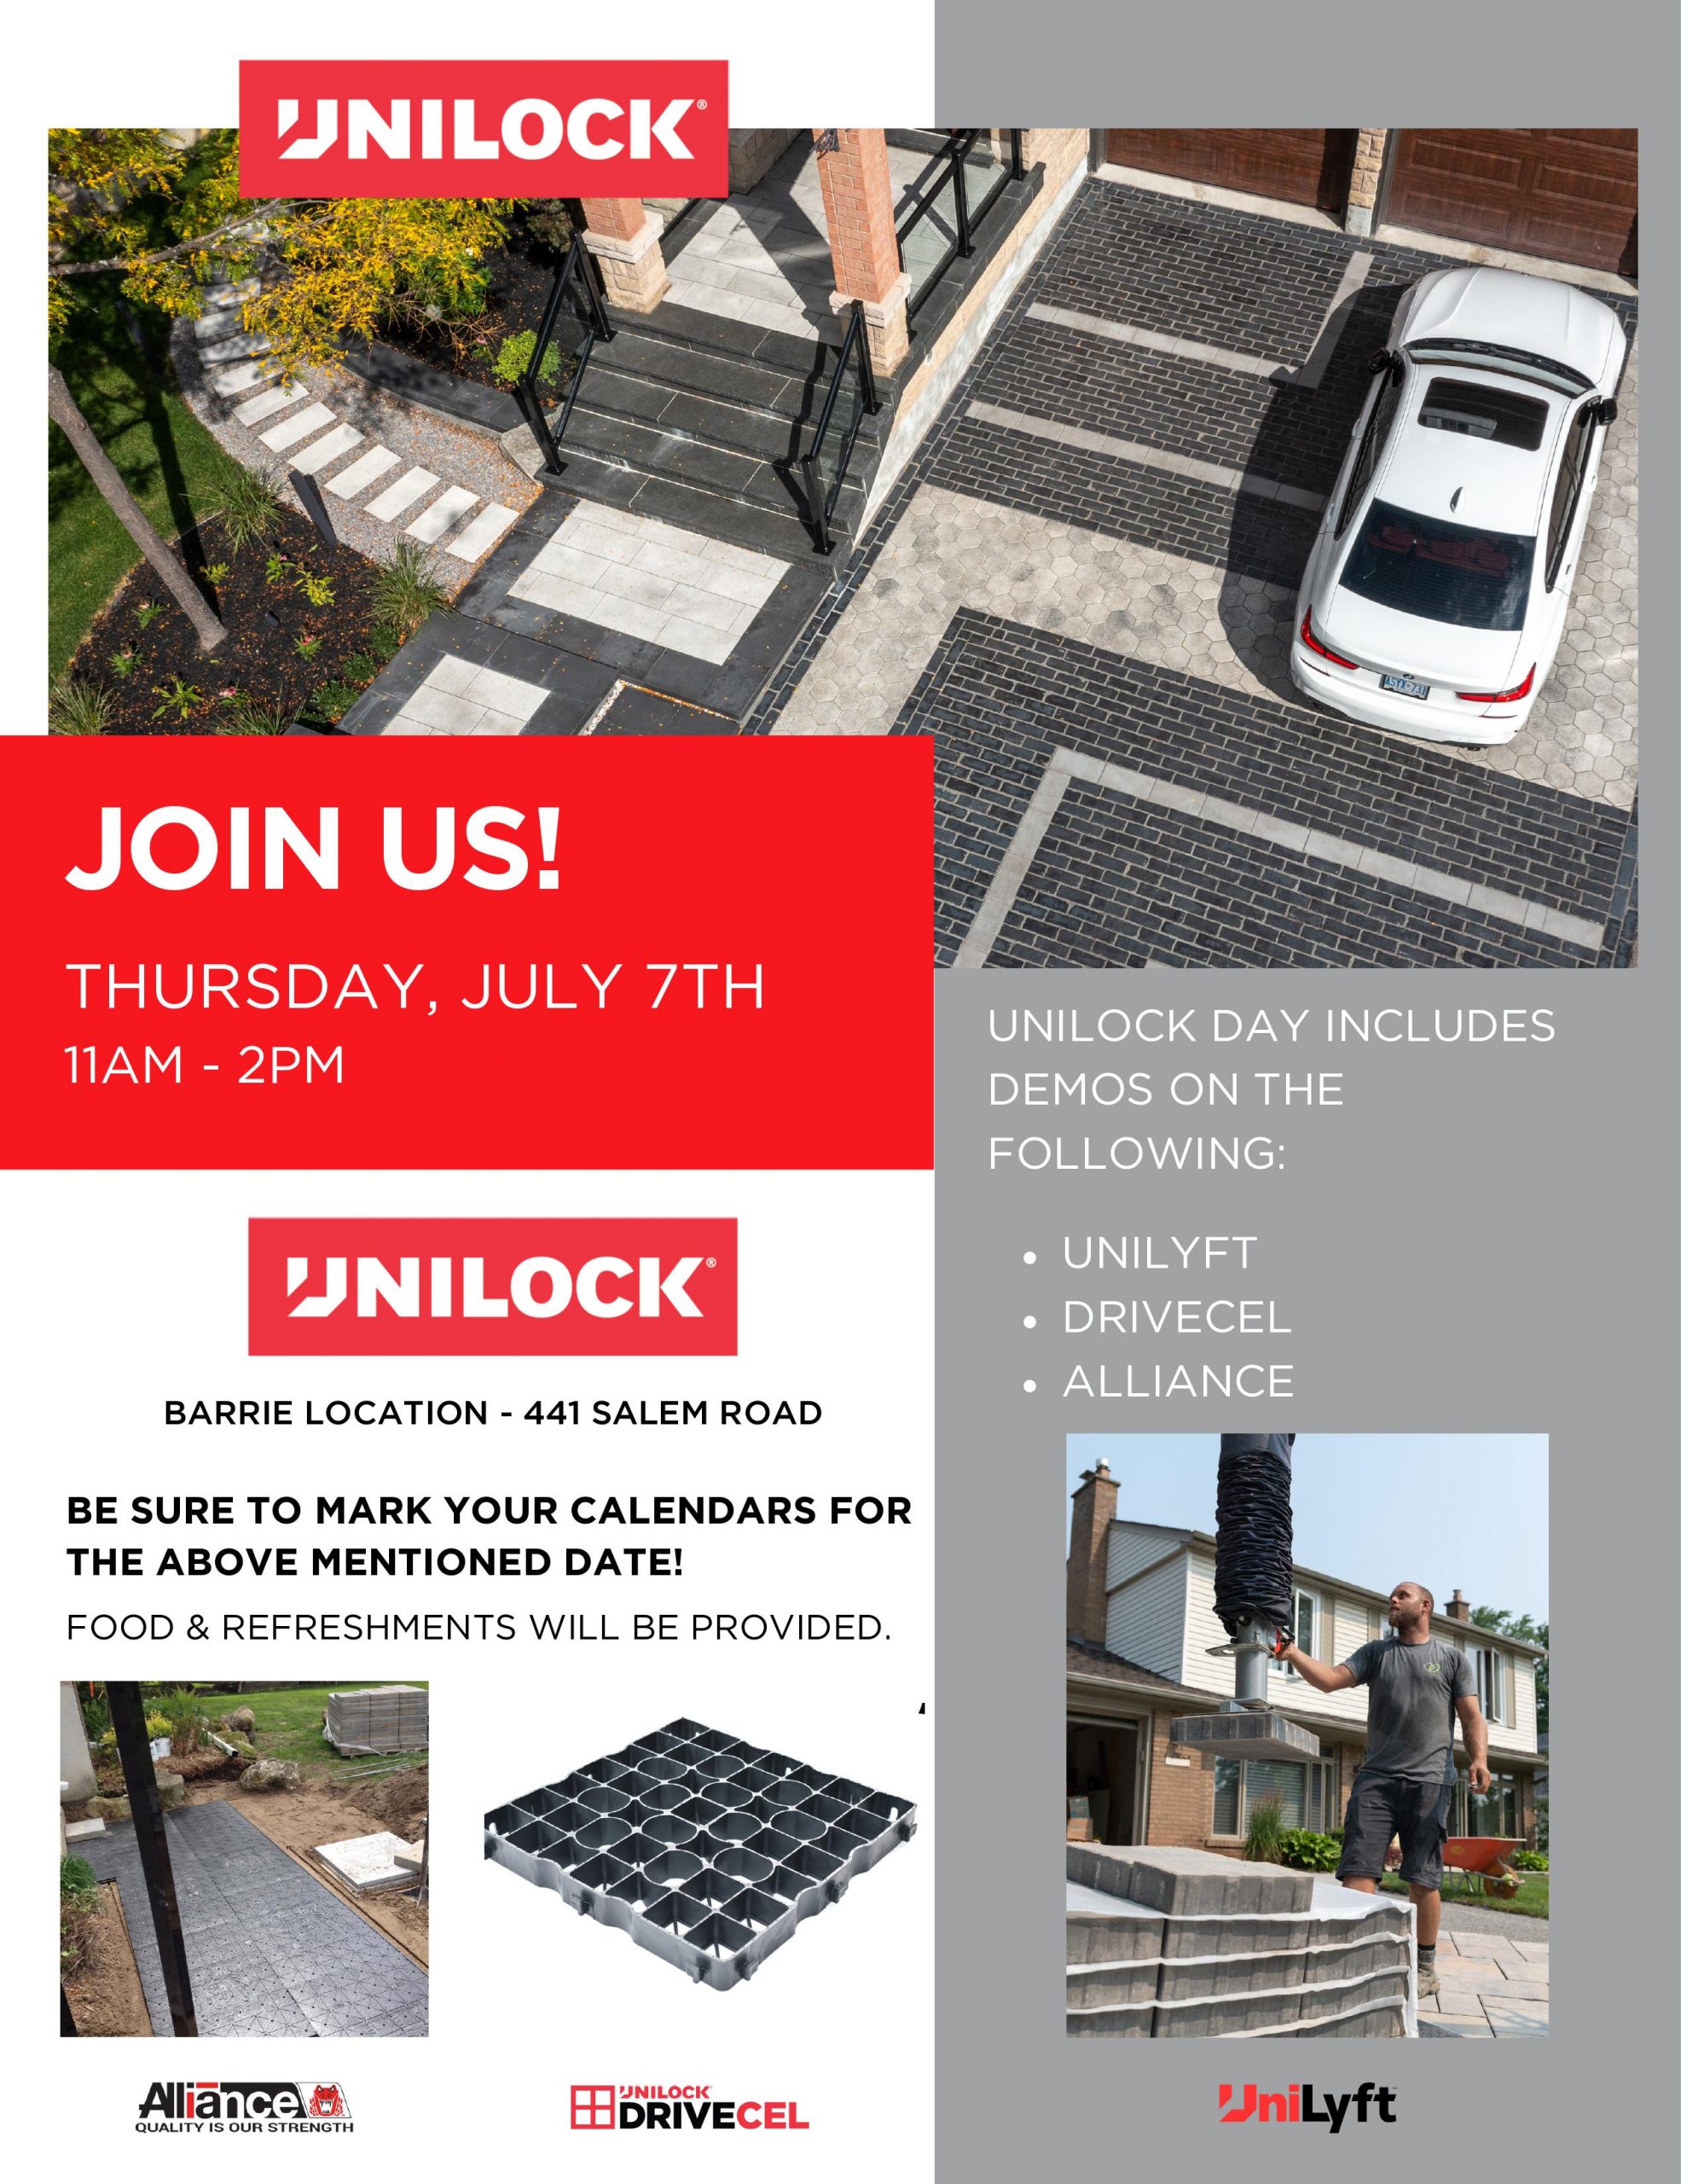 Unilock Day Flyer JULY 7TH Barrie Location